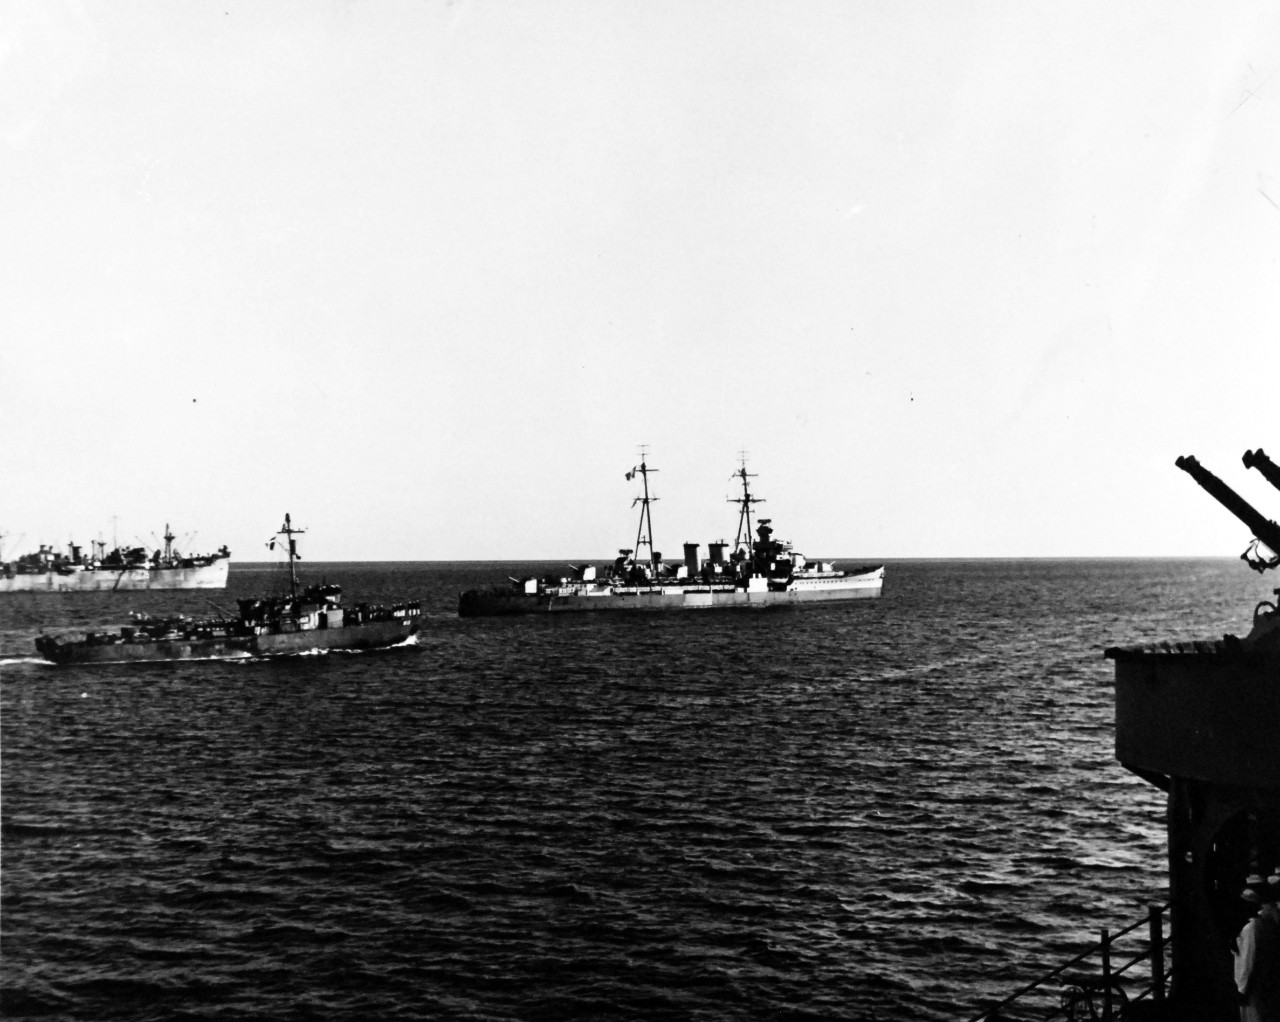 80-G-248717:   Invasion of Southern France, Toulon,  September 1944.   General C. DeGaulle in small ship approaching HMS Sirius, 16 September 1944.    Cruiser in center is HMS Delhi. Taken by USS Philadelphia (CL-41).  Official U.S. Navy Photograph, now in the collection of the National Archives.  (2014/4/10). 